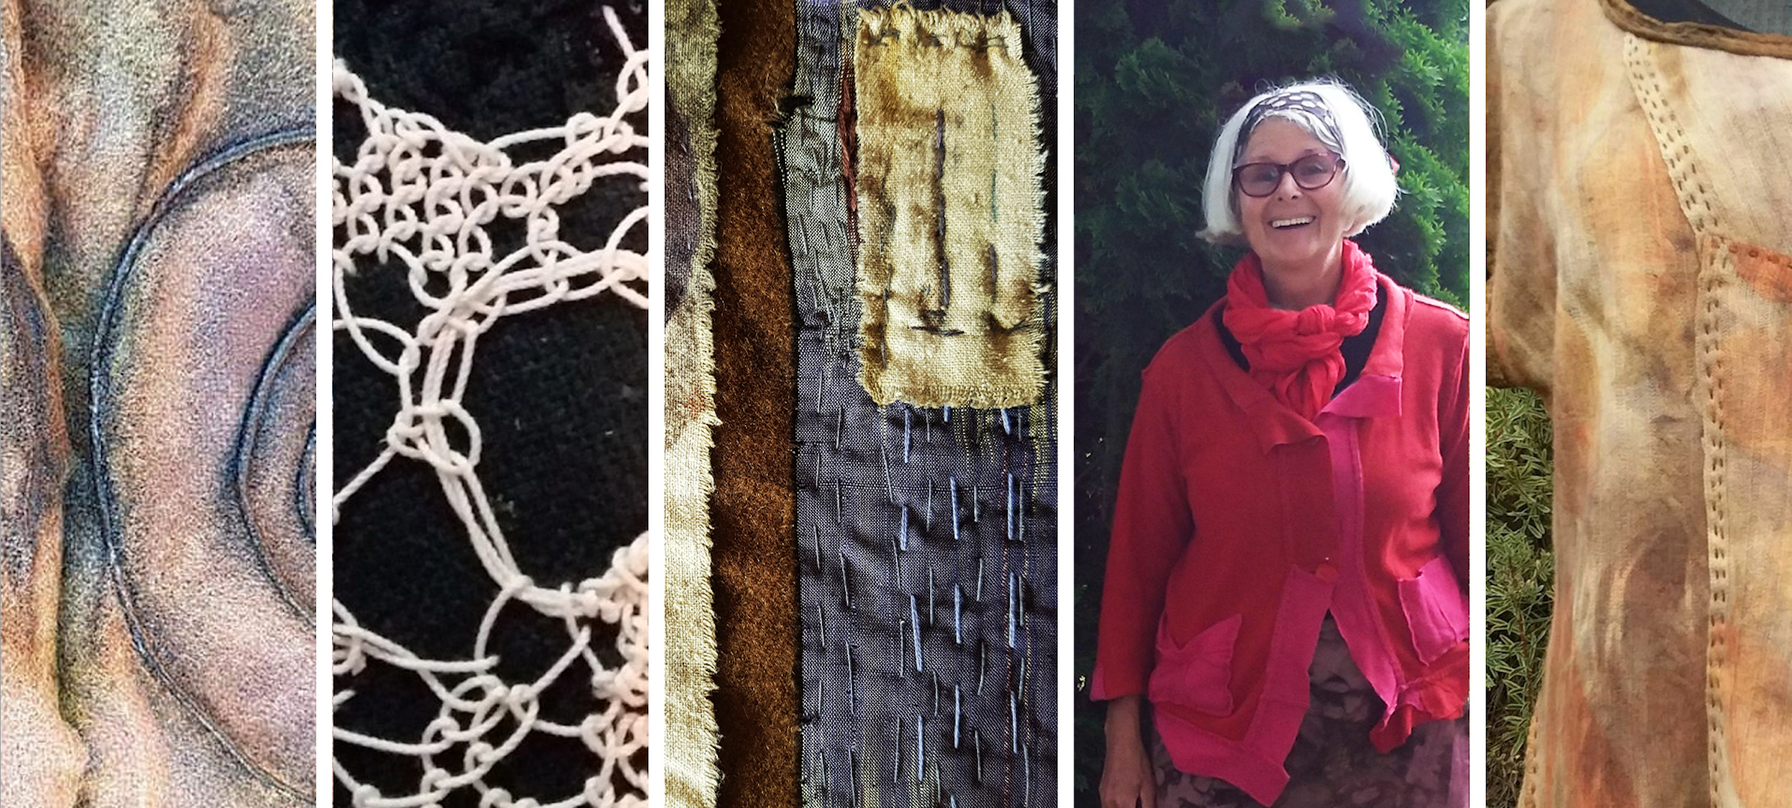 A collage of photos featuring Aukje Boonstra's works. The photos show different textiles, wires and ropes that are stitched and knotted together to create wearable art. Credit Aukje Boonstra.